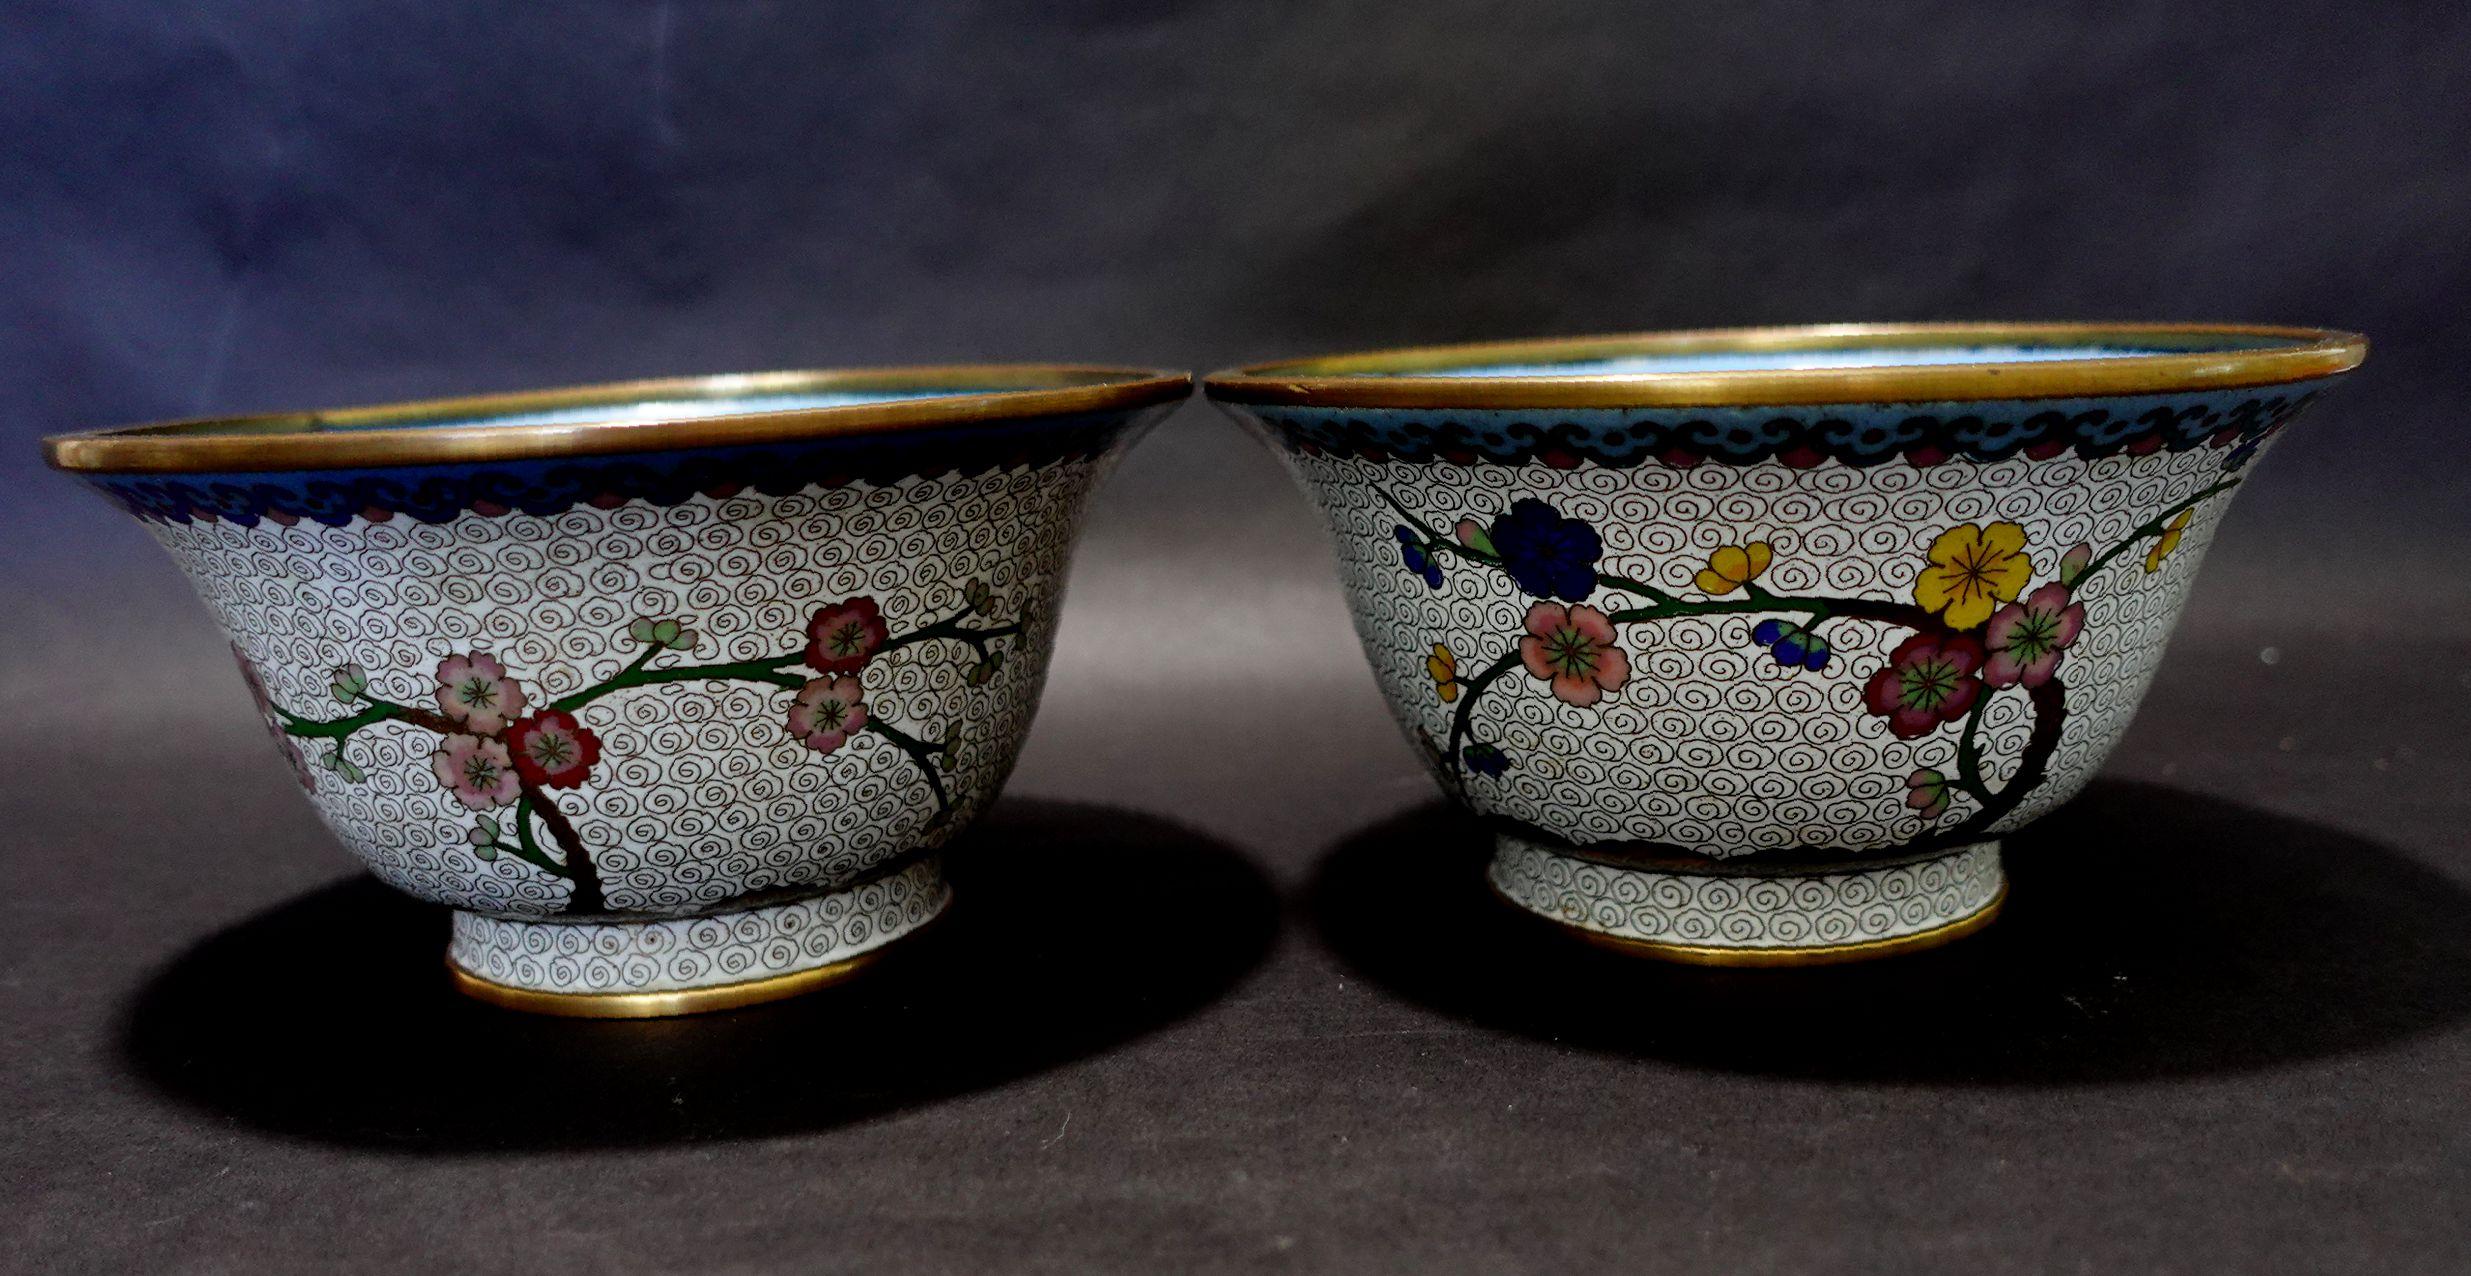 Antique pair of Thick and Heavy Chinese cloisonné enamel Bowls depicting floral patterns. A white base tone and colorful floral all around, from the 19th century.
